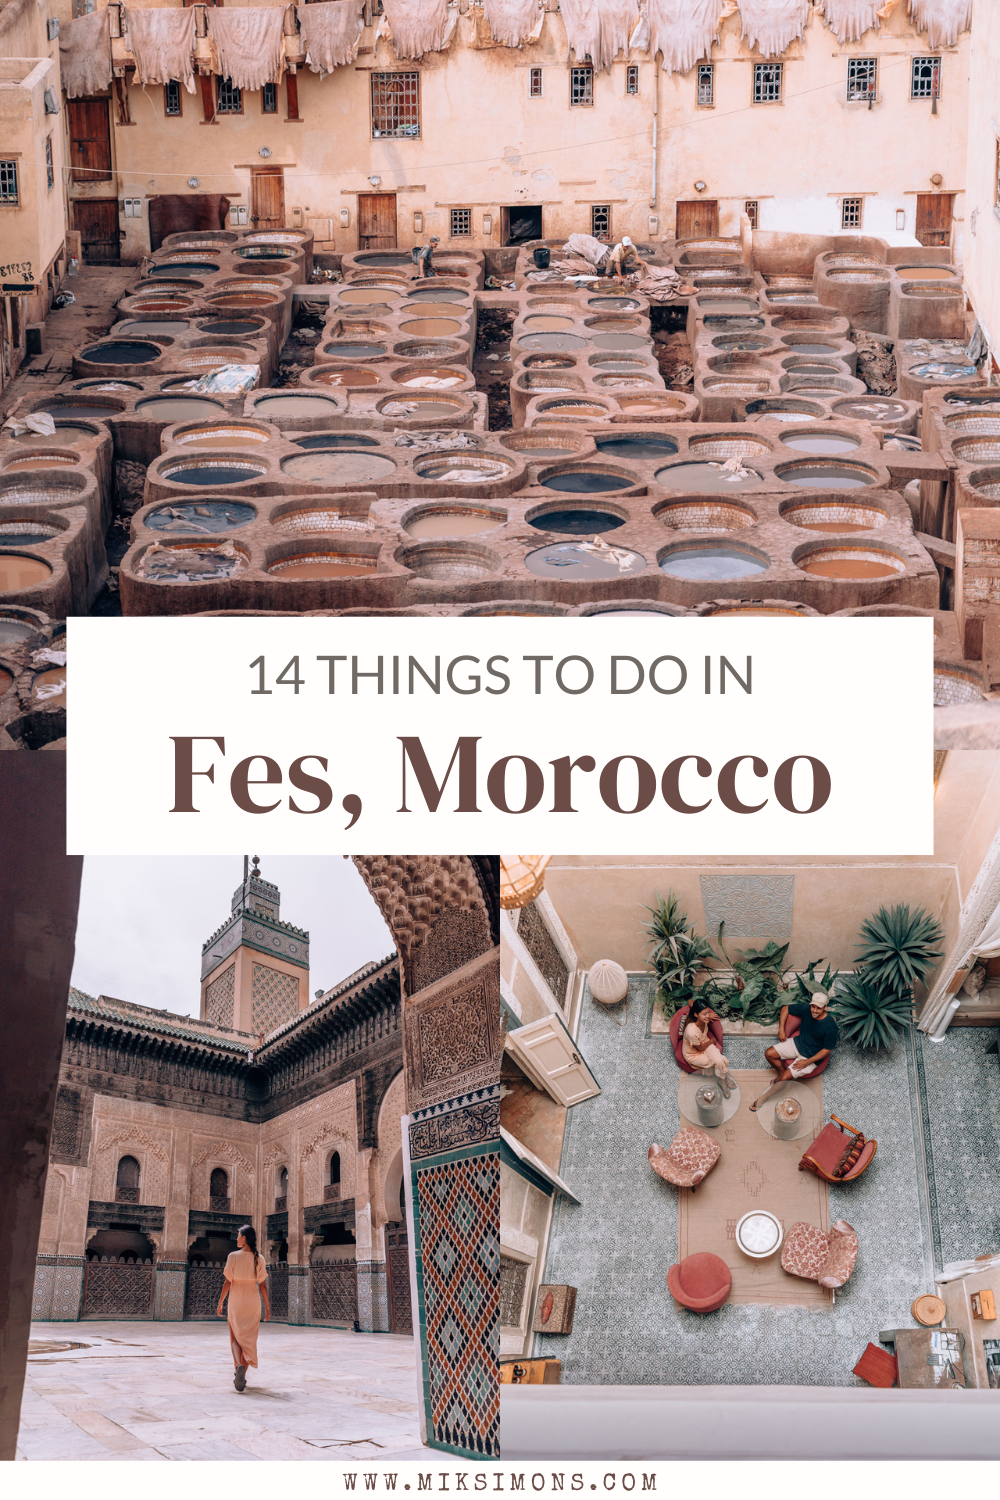 14 best Things to do in fes 2